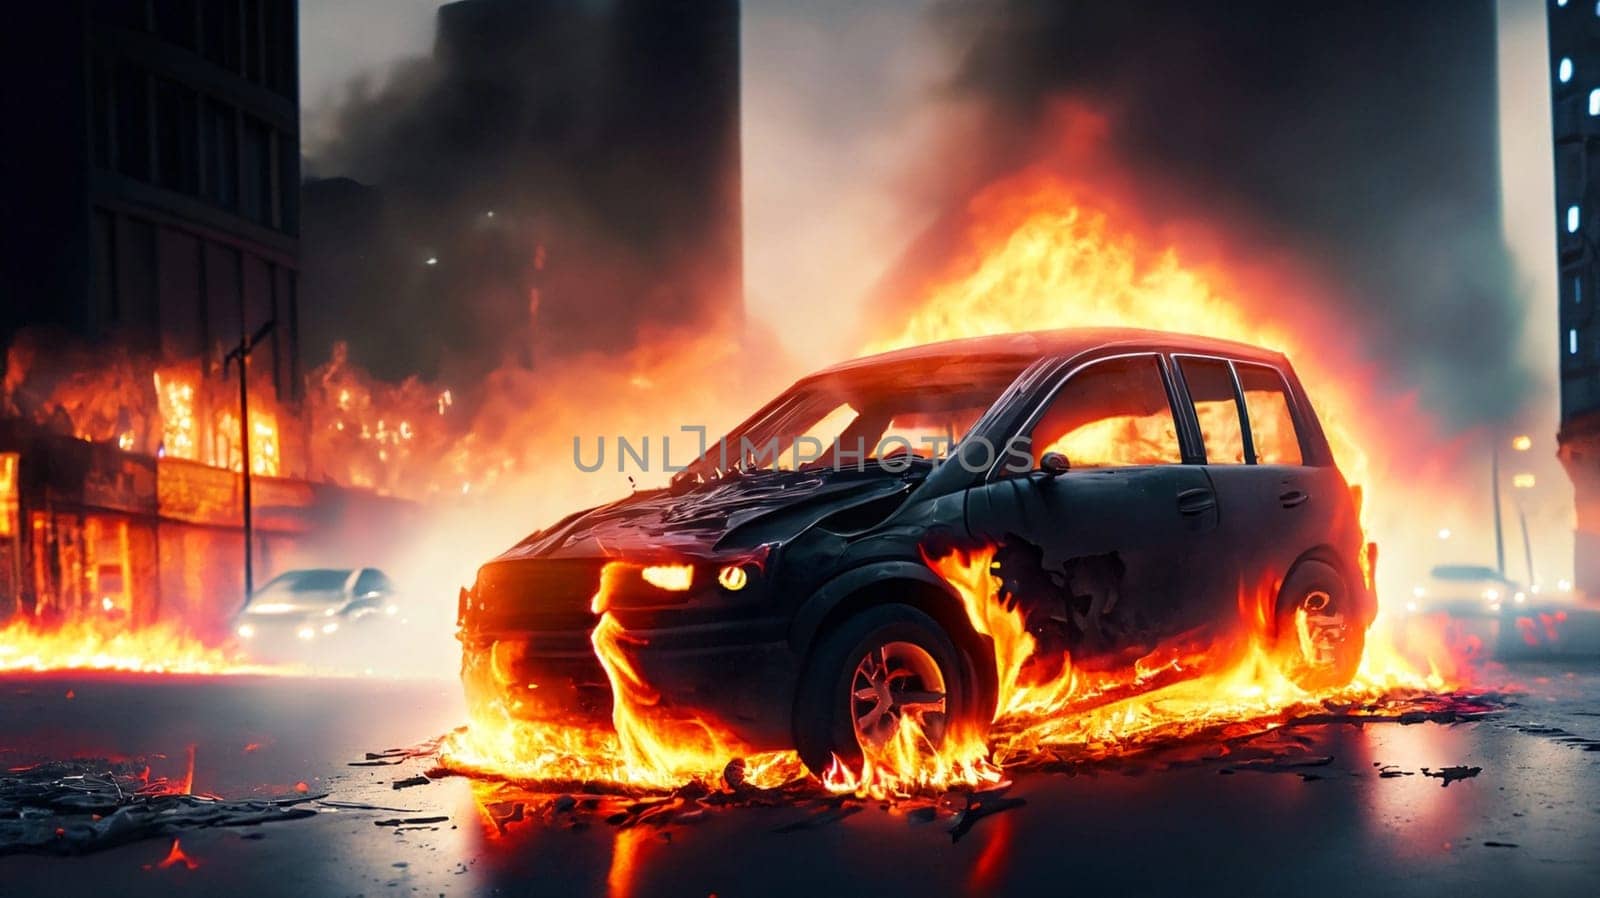 Disorders, protests in the Europa. Burning car on a city street, smoke and flames all around. Dispersal of demonstrations, patrolling during riots. Clashes on Europe streets, mixed media image. High quality photo